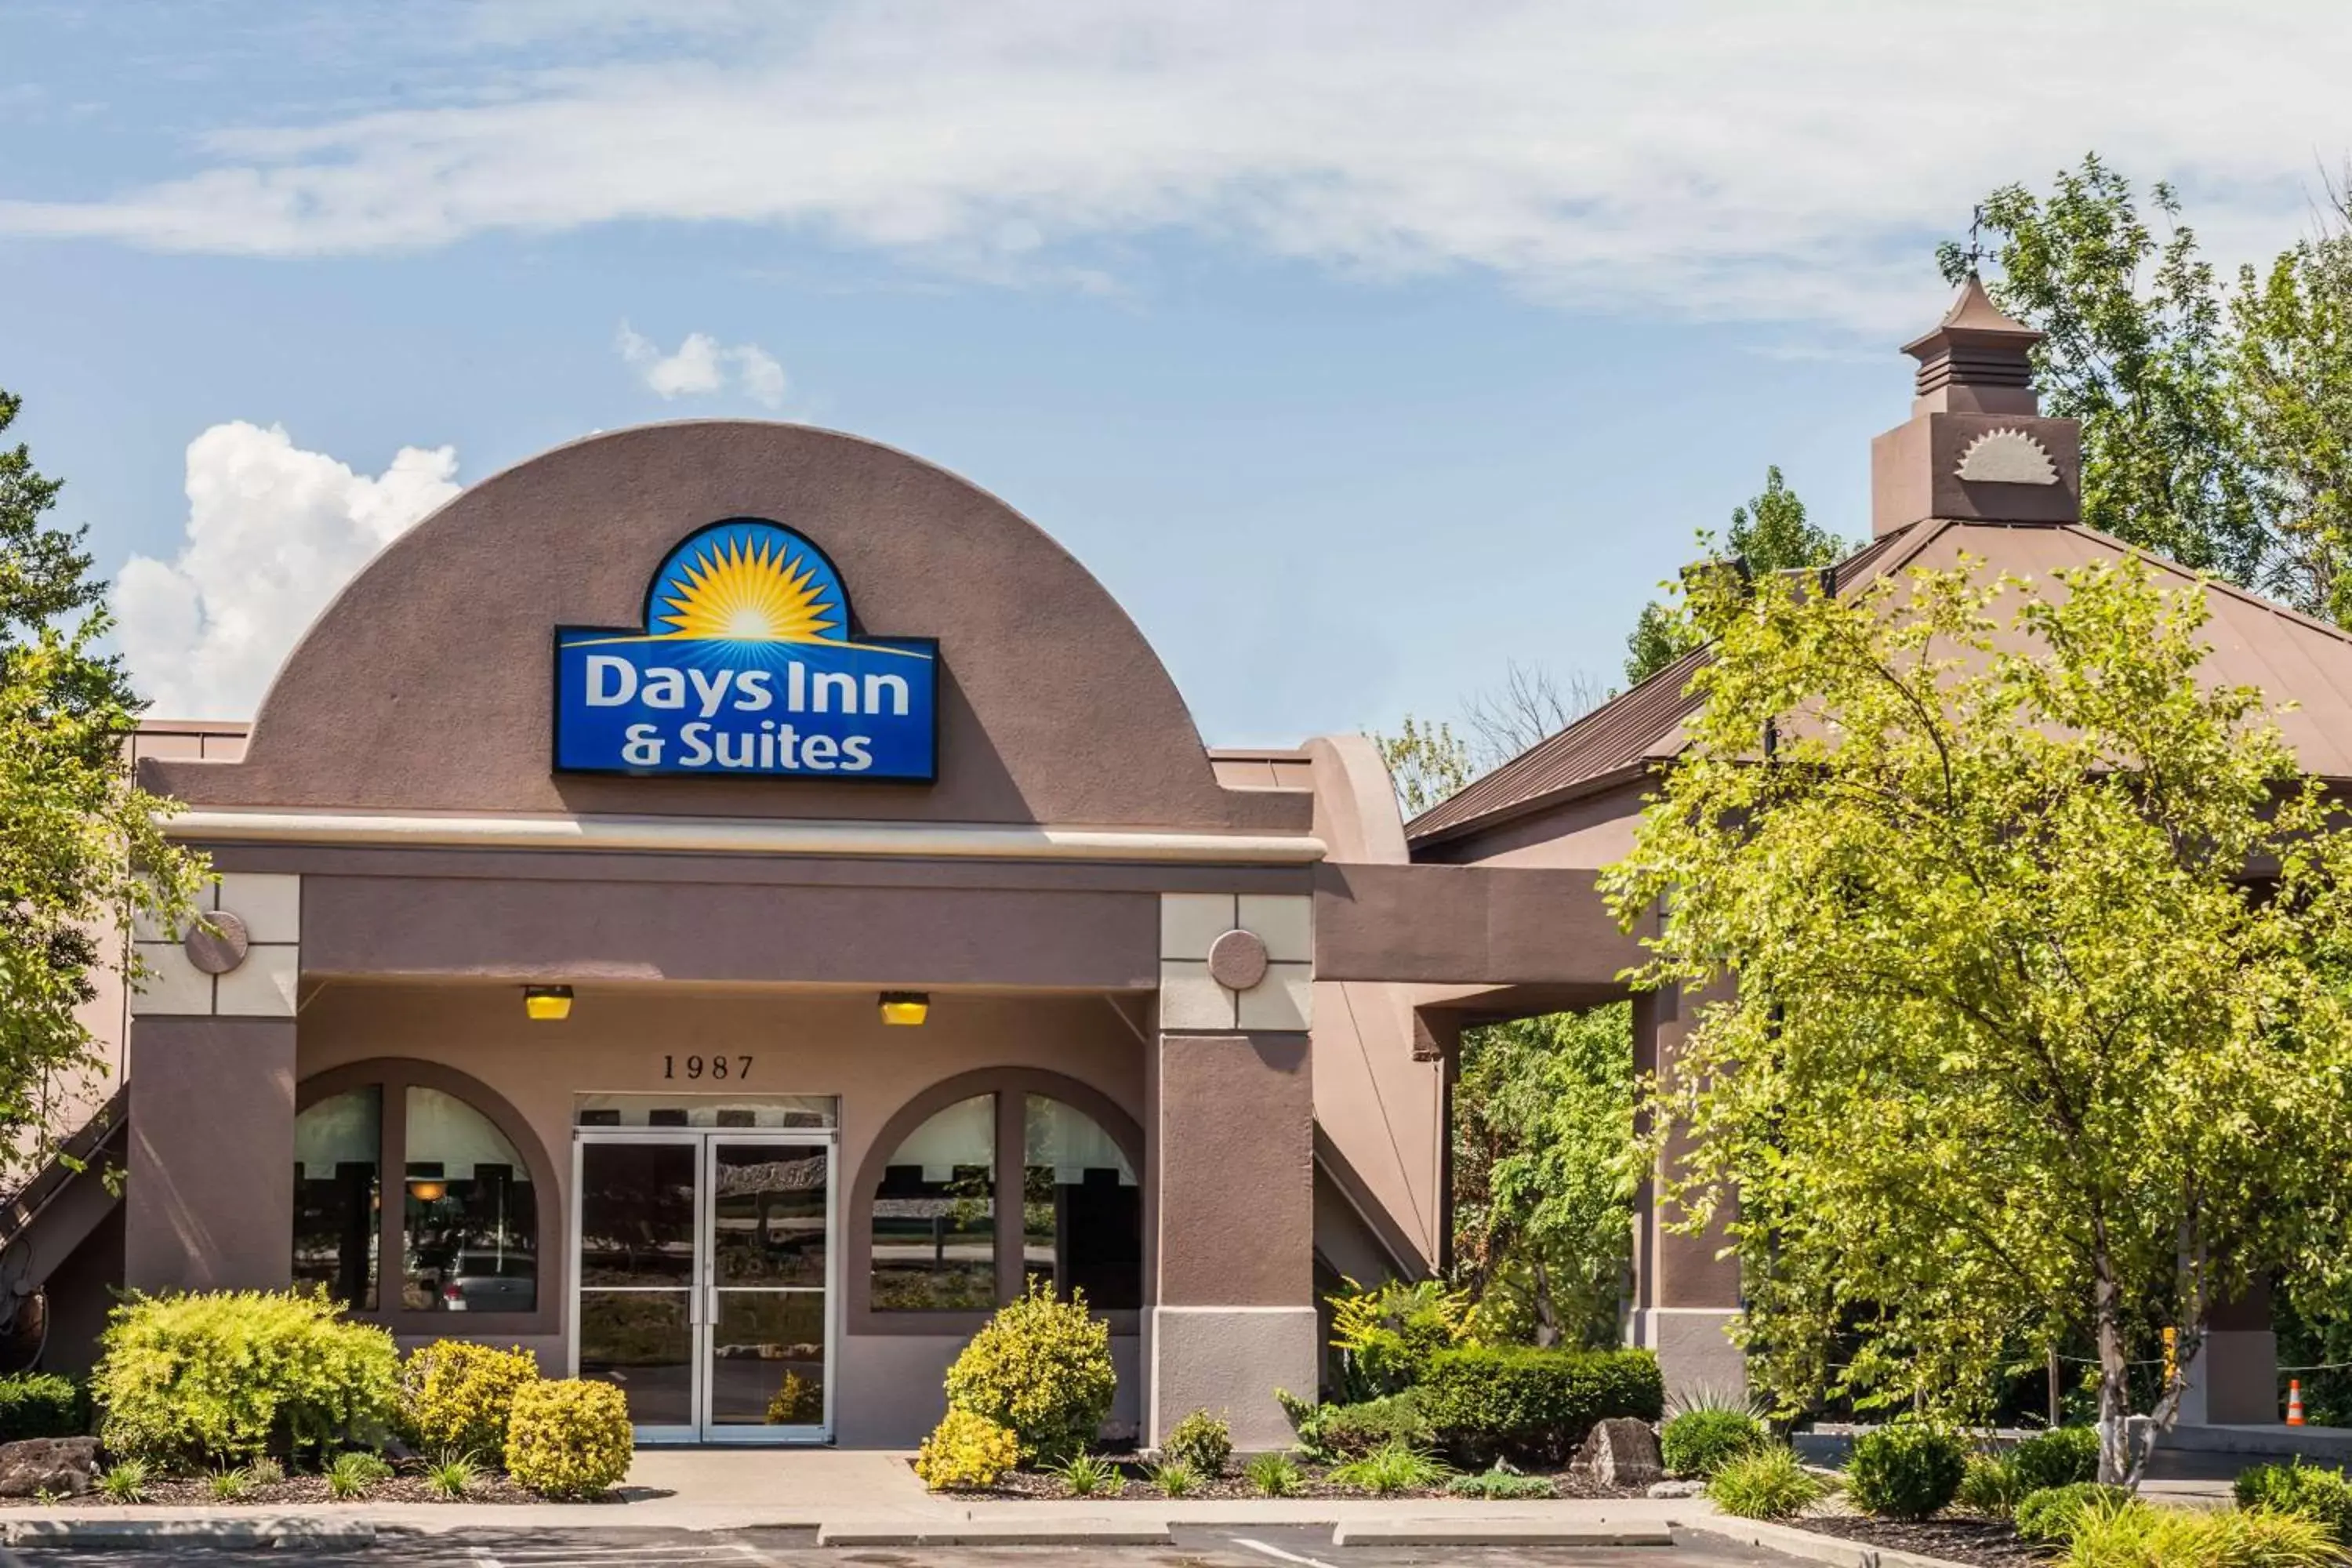 Property building in Days Inn & Suites by Wyndham Lexington